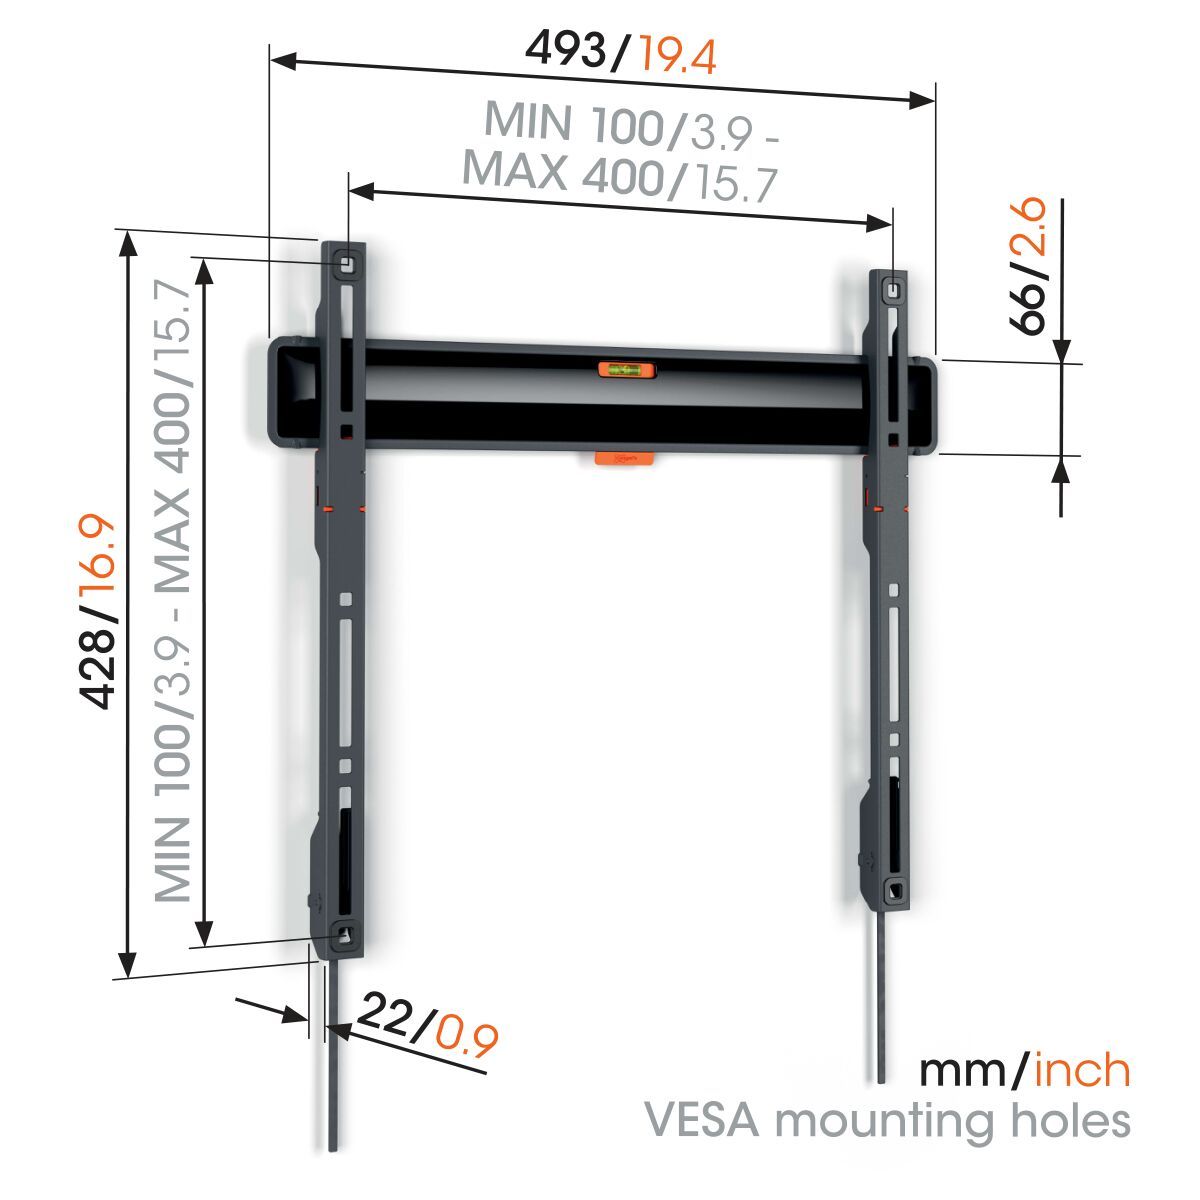 Vogel's TVM 3405 Fixed TV Wall Mount - Suitable for 32 up to 77 inch TVs - Dimensions